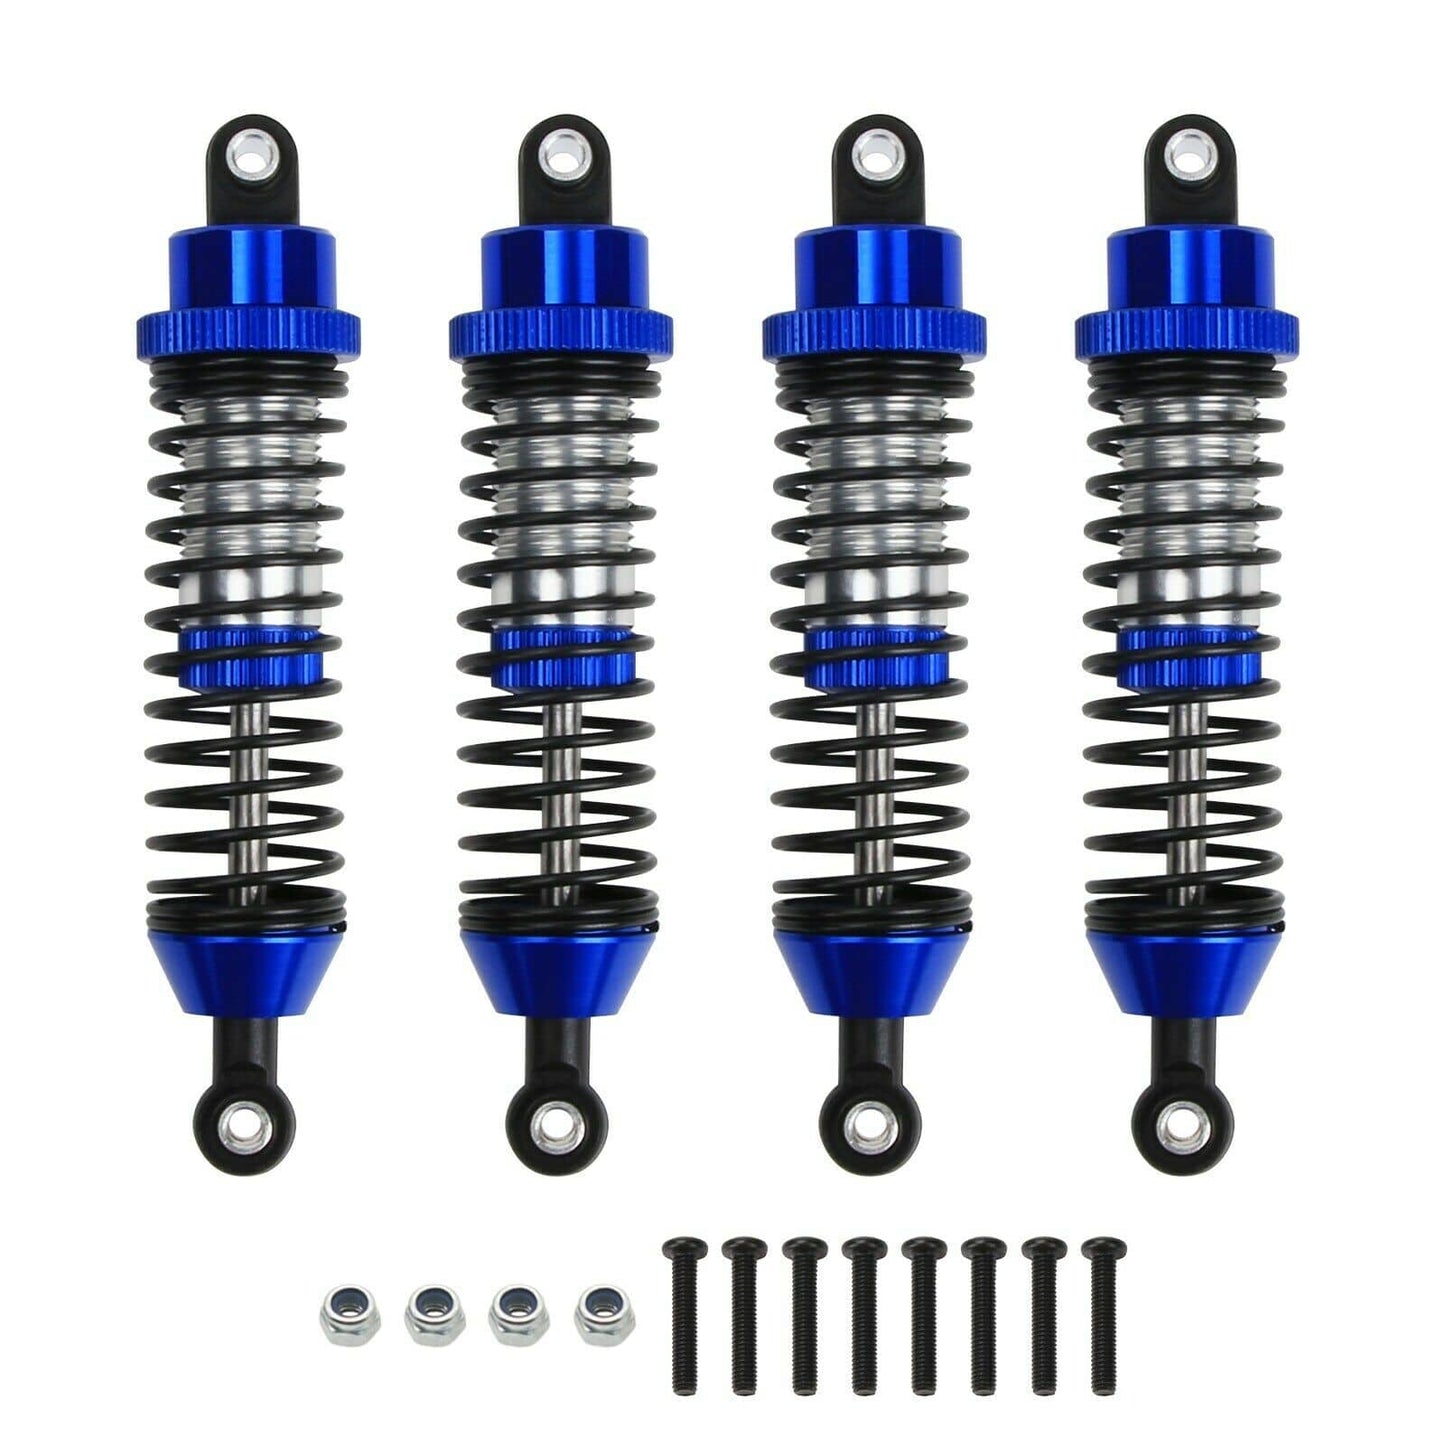 RCAWD REDCAT UPGRADE PARTS Navy Blue RCAWD RCFront Rear Shock BS214-011 for 1/10 Redcat Racing Blackout SC XTE XBE PRO